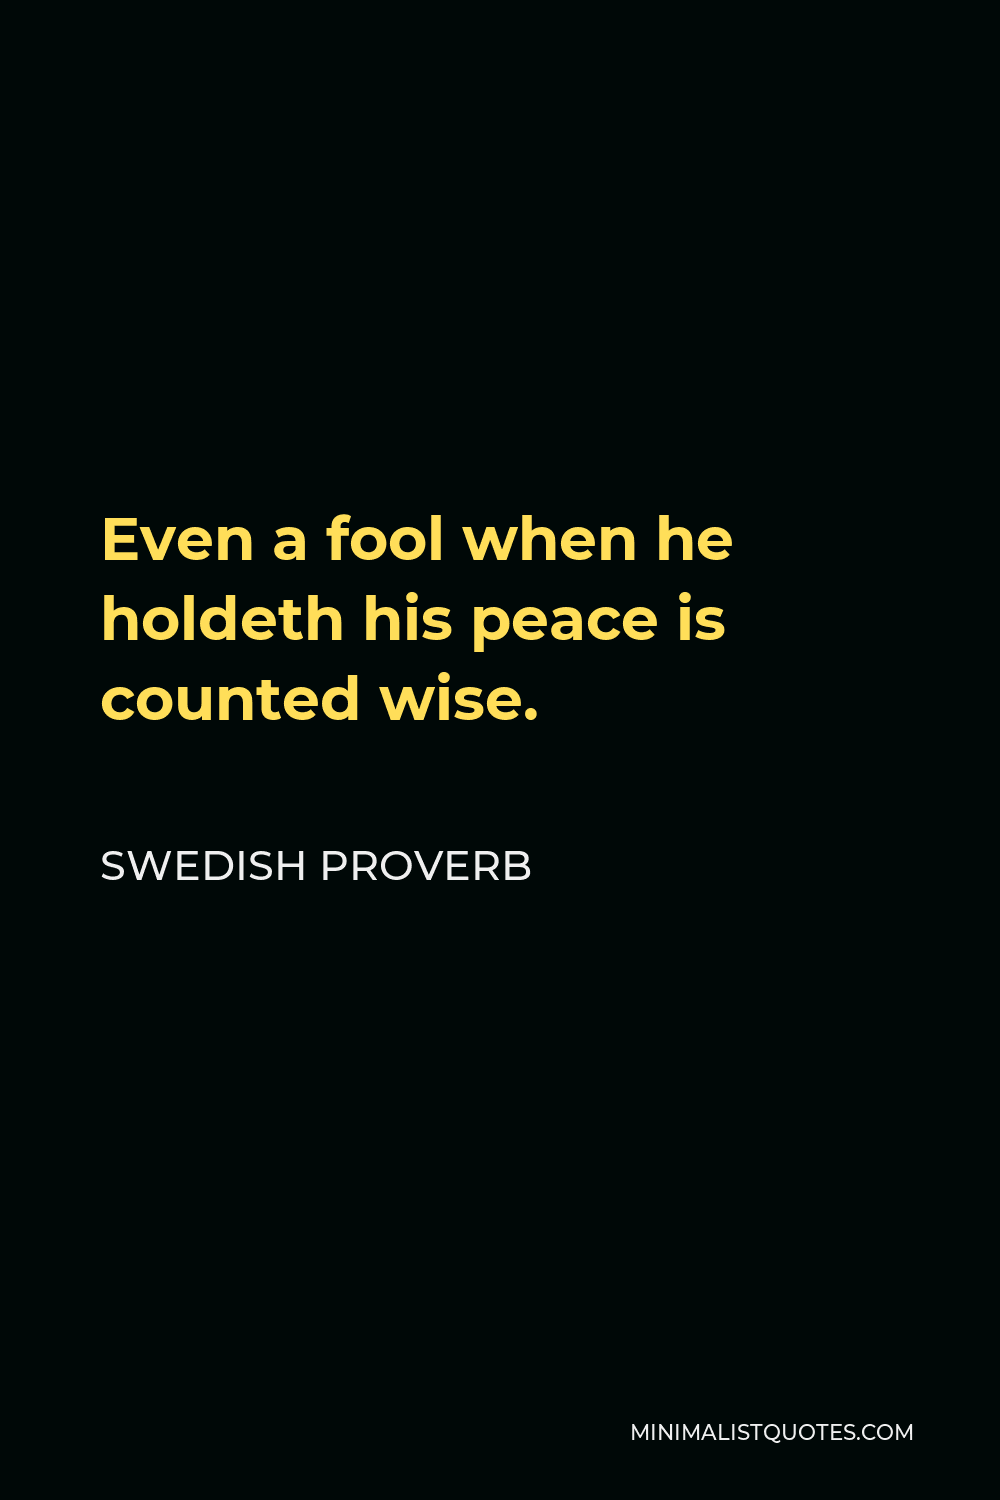 Swedish Proverb Quote - Even a fool when he holdeth his peace is counted wise.